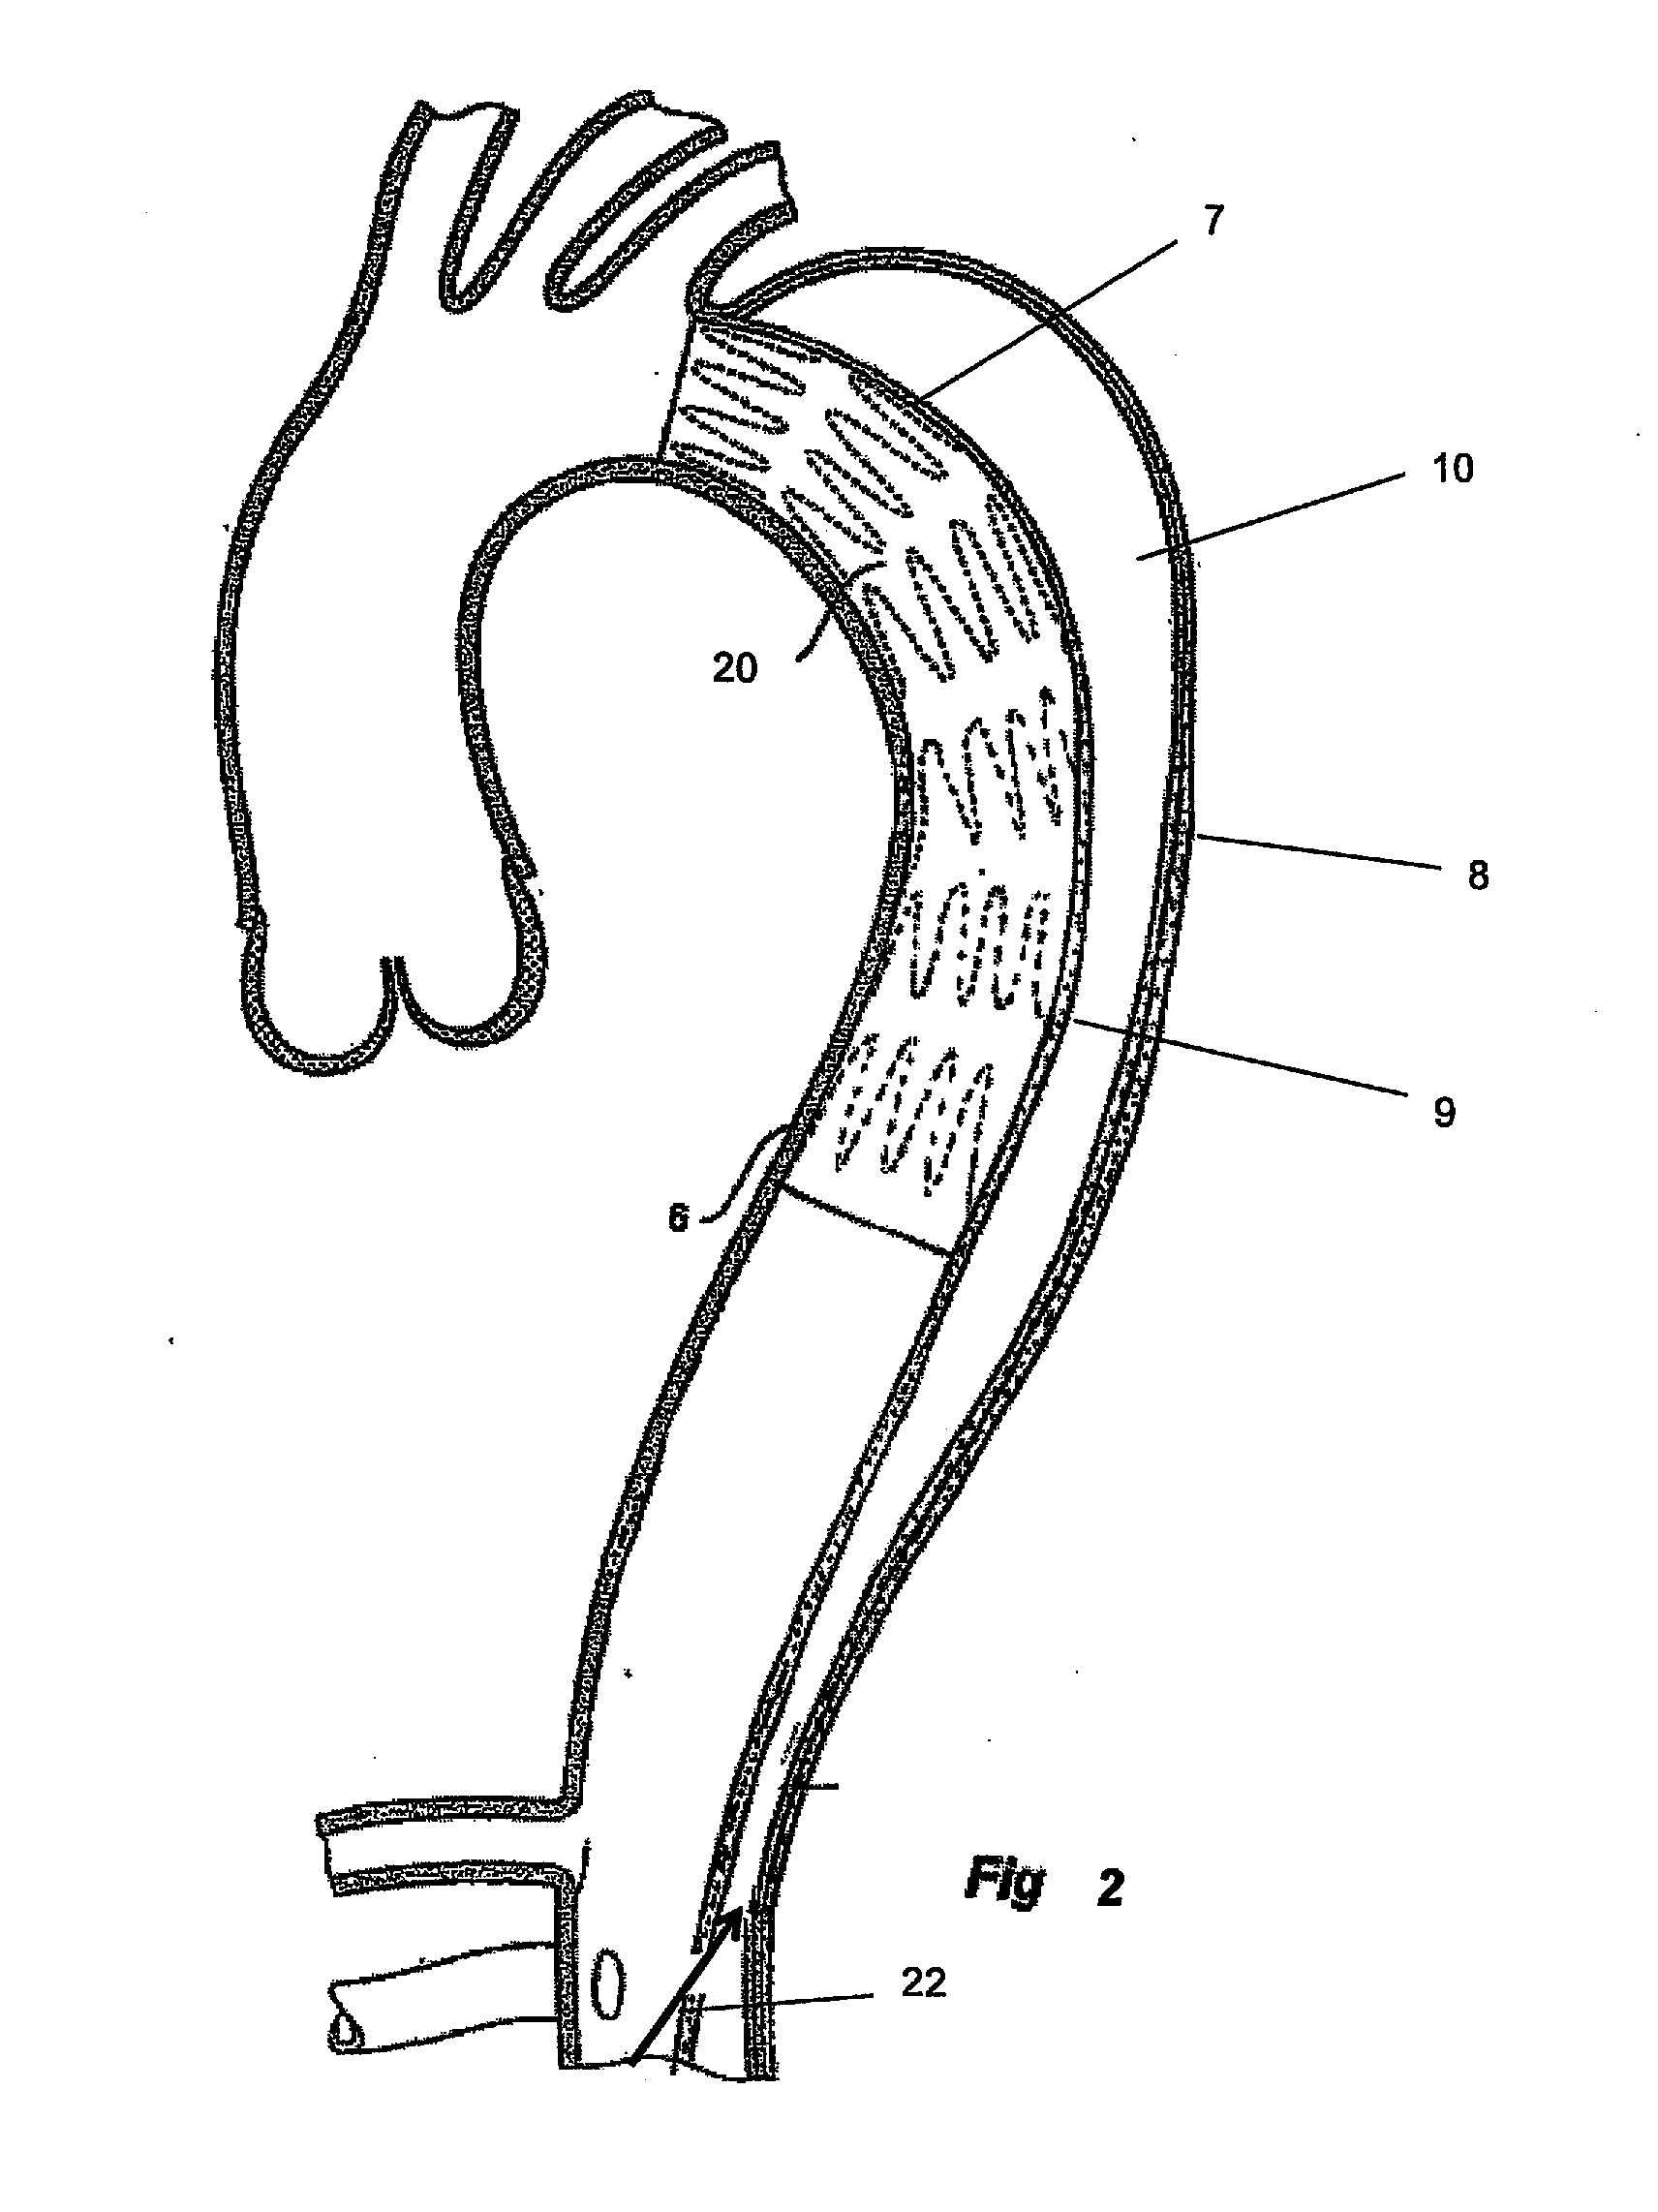 Device and method for treating vascular dissections